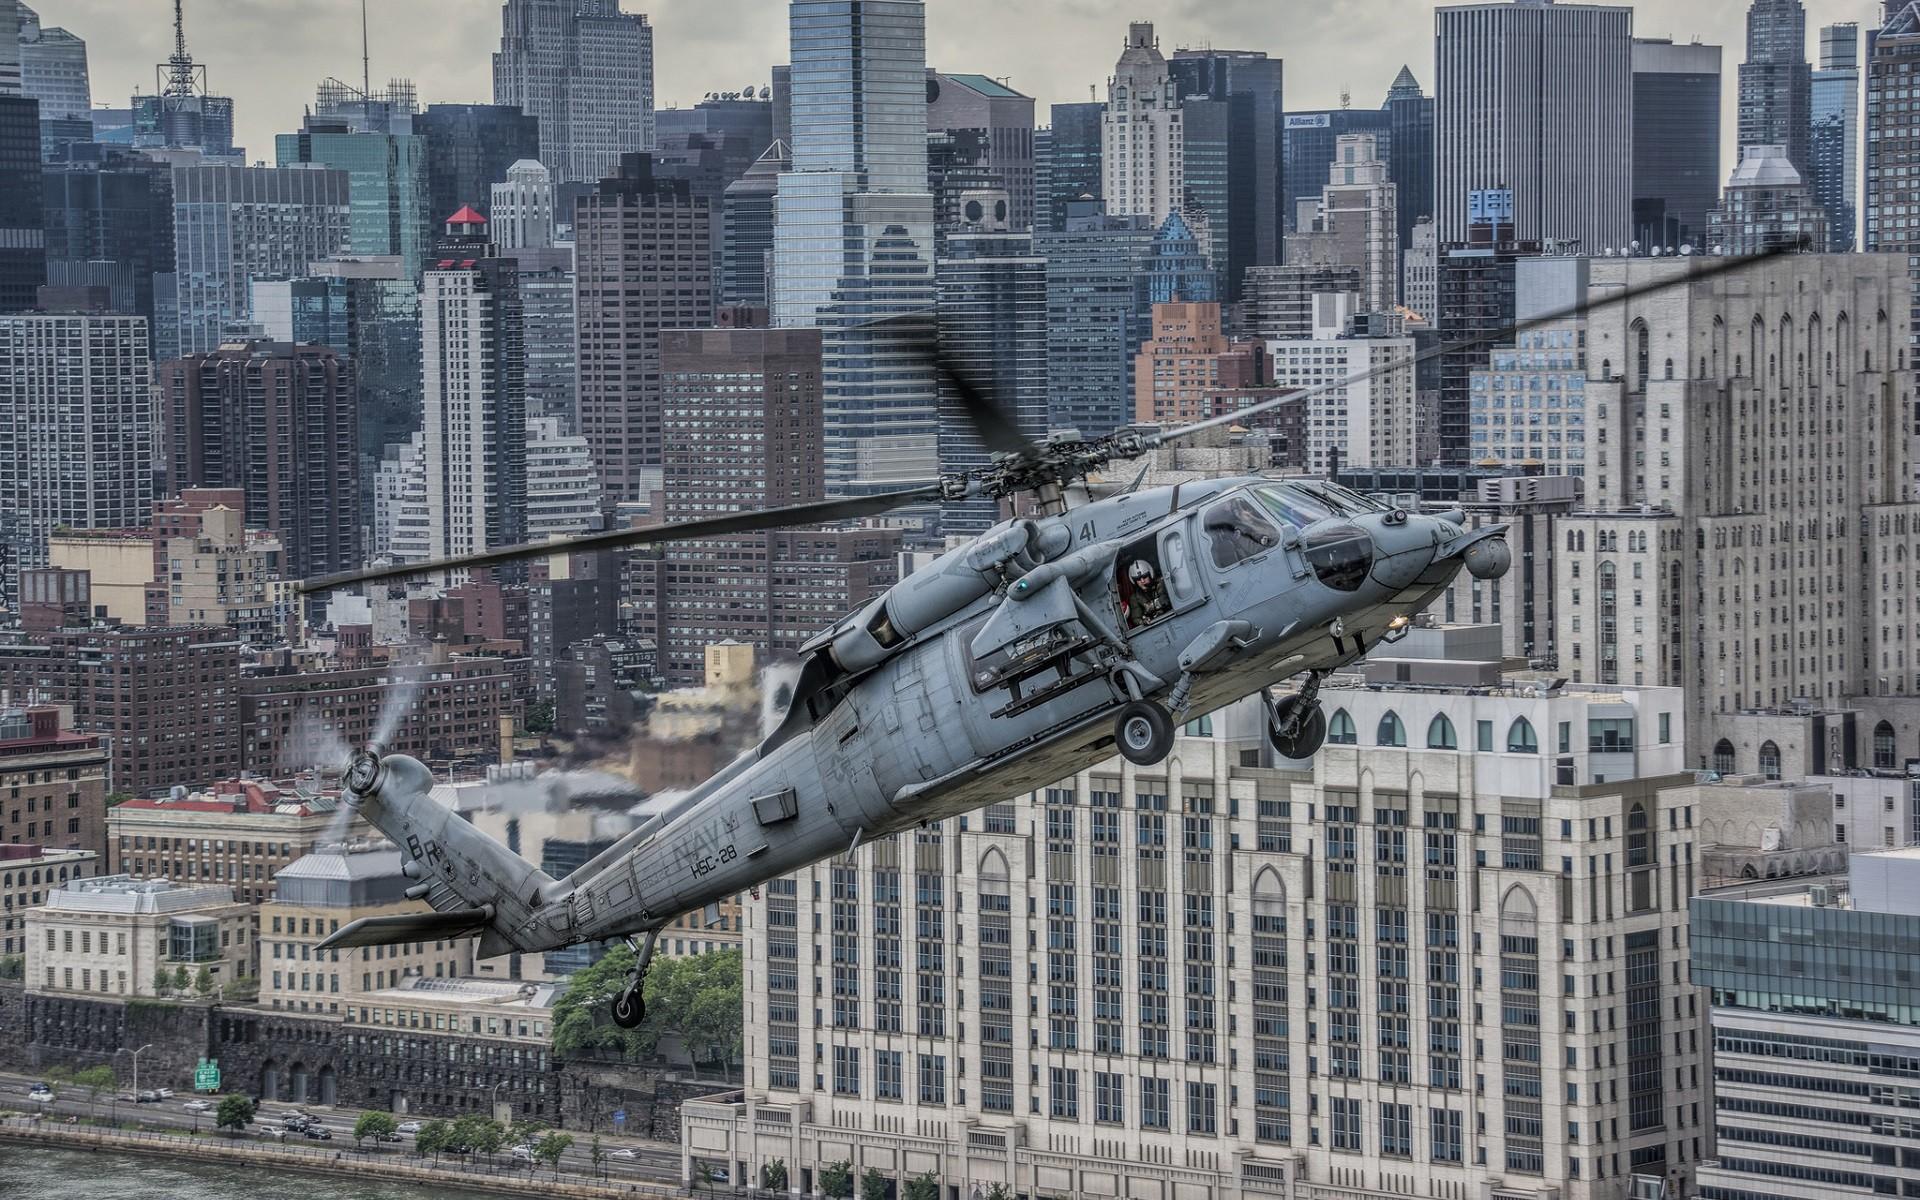 HD wallpaper, Helicopters, United States Navy, Aircraft, Skyscraper, Sikorsky Aircraft, Cityscape, Vehicle, Sikorsky Mh 60R Seahawk, American Aircraft, City, Military Aircraft